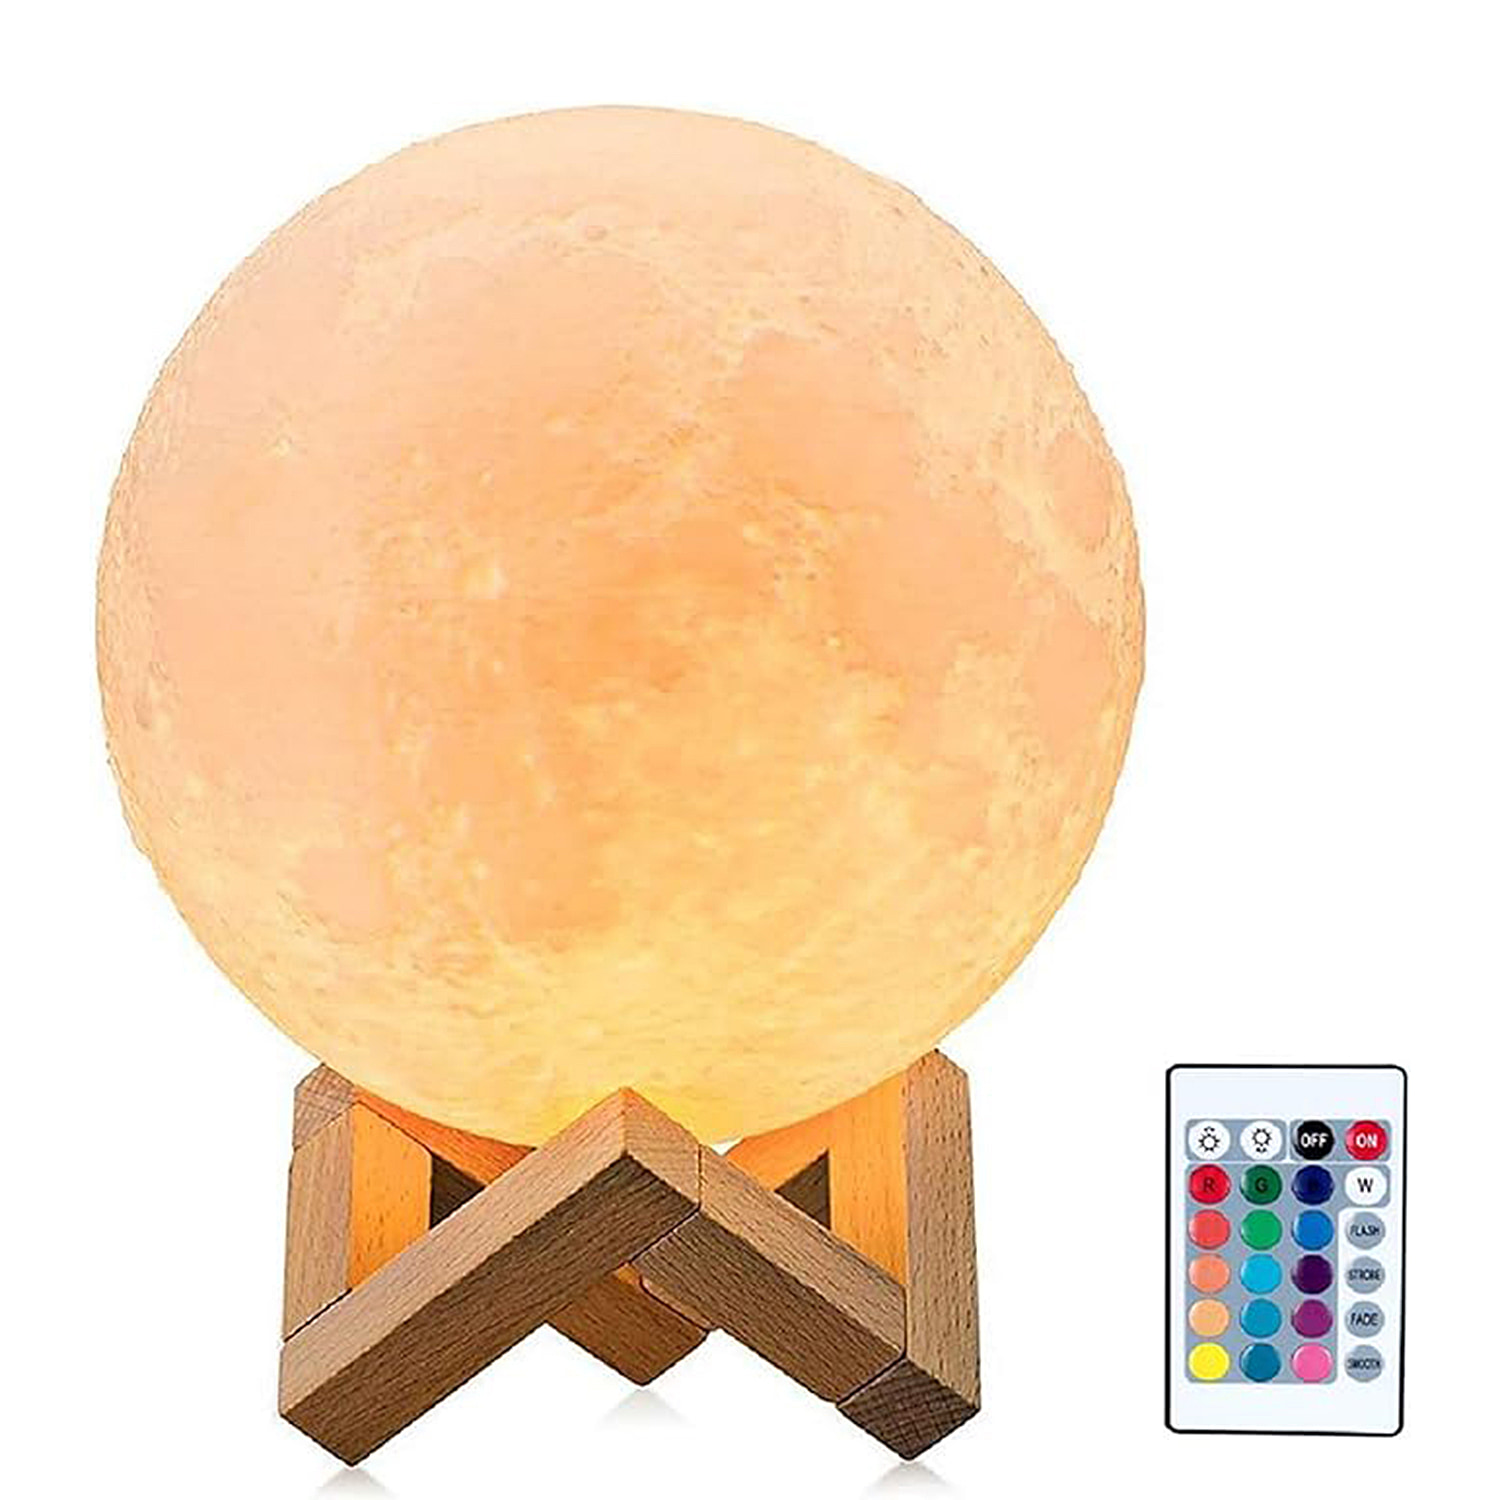 3D-Moon-Lamp-Mayround-Full-Moon-Lamp-Light-3D-Printing-Dimmable-Modern